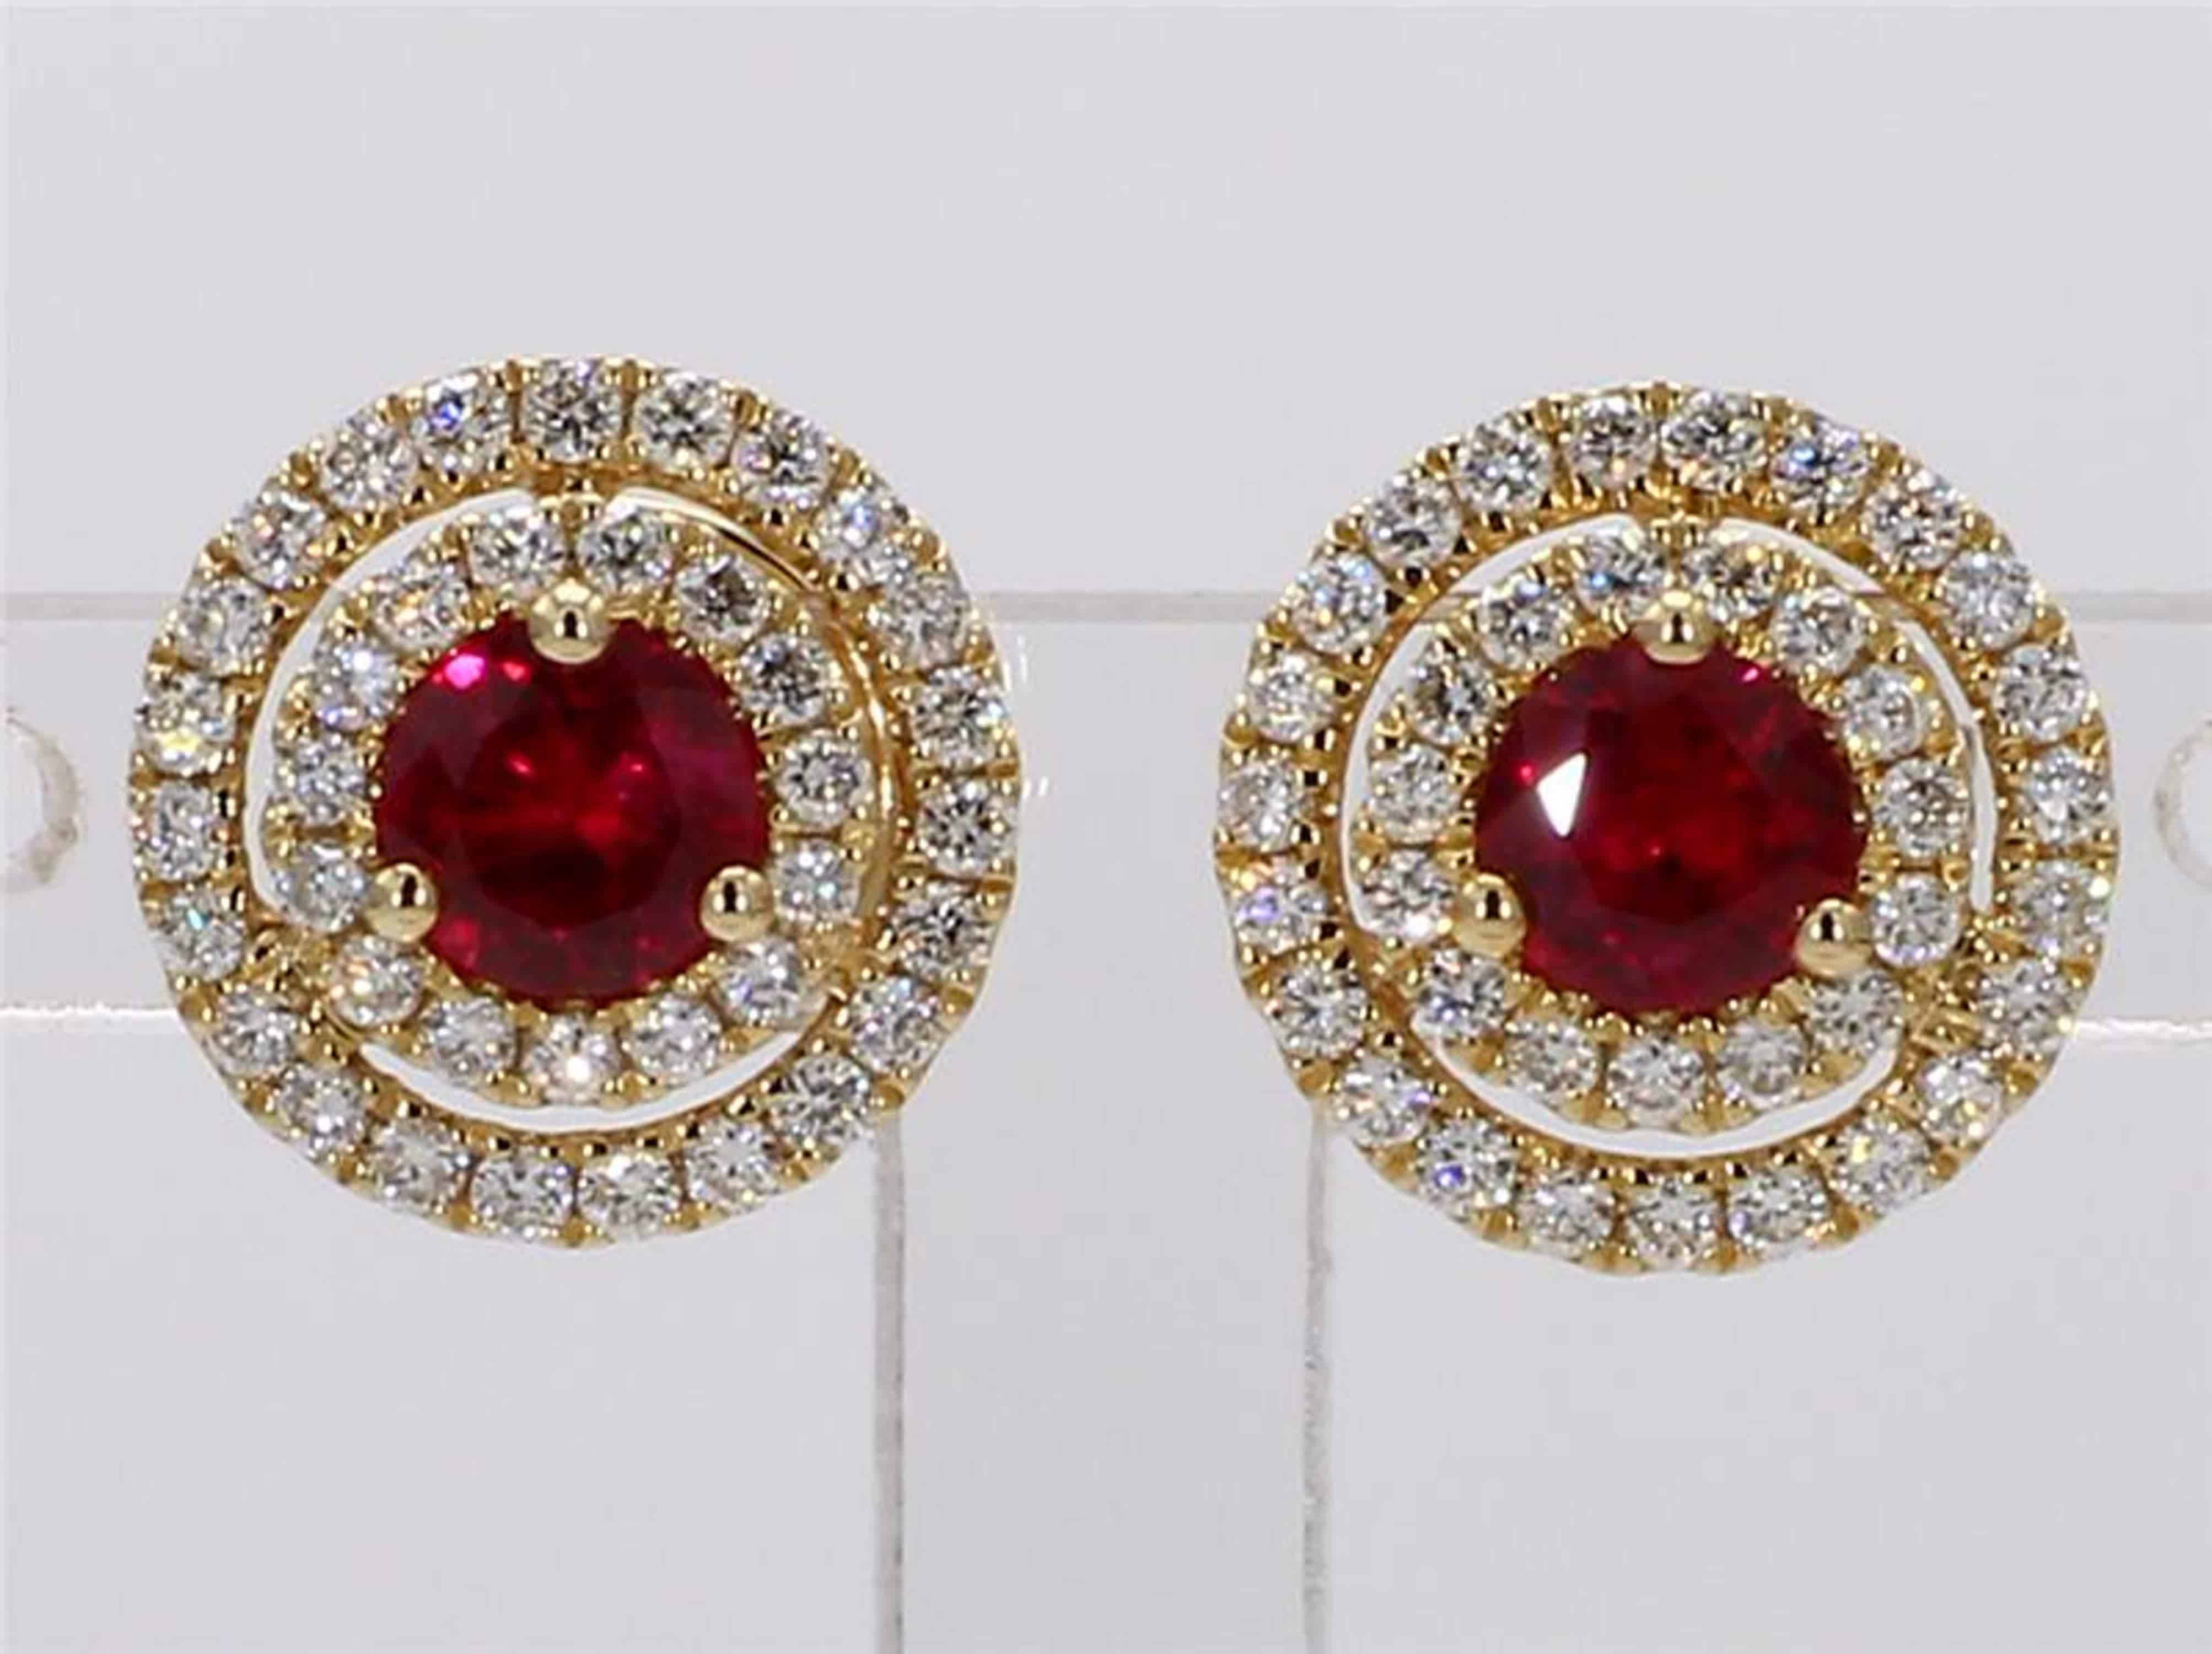 RareGemWorld's classic ruby earrings. Mounted in a beautiful 14K Yellow Gold setting with natural round cut red ruby's. These ruby's are surrounded by a double halo of natural round white diamond melee. These earrings are guaranteed to impress and